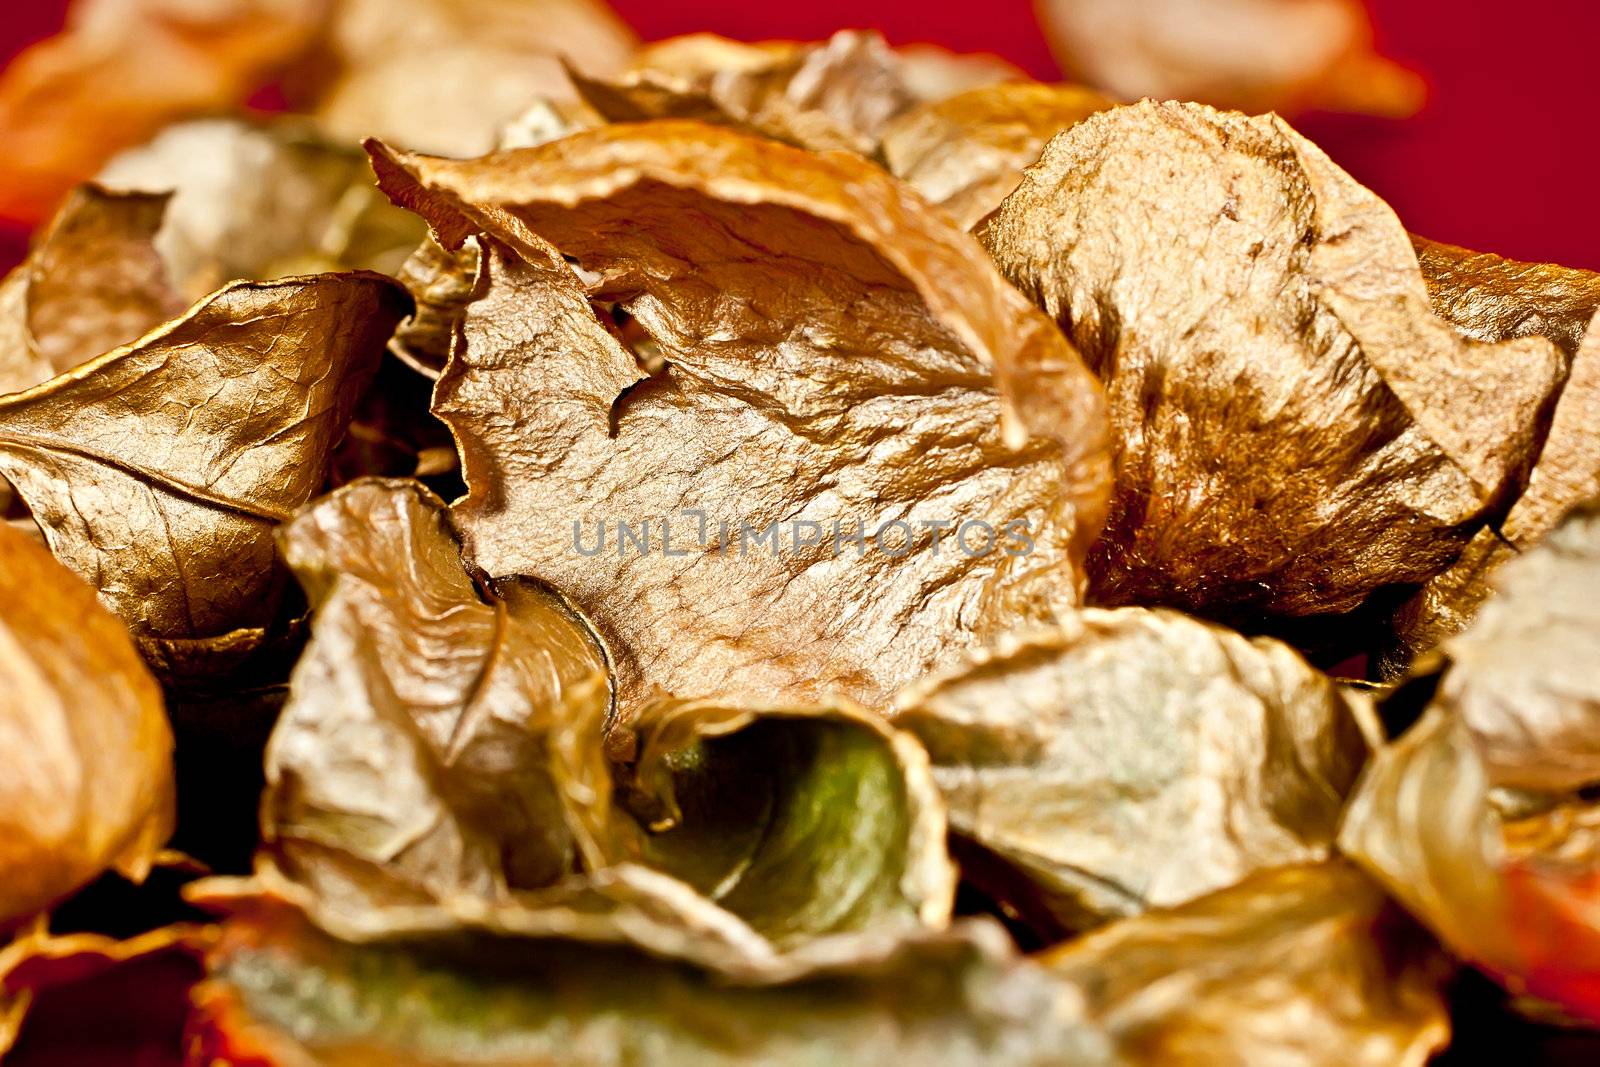 Gold-colored rose petals, can be used as Christmas decor.